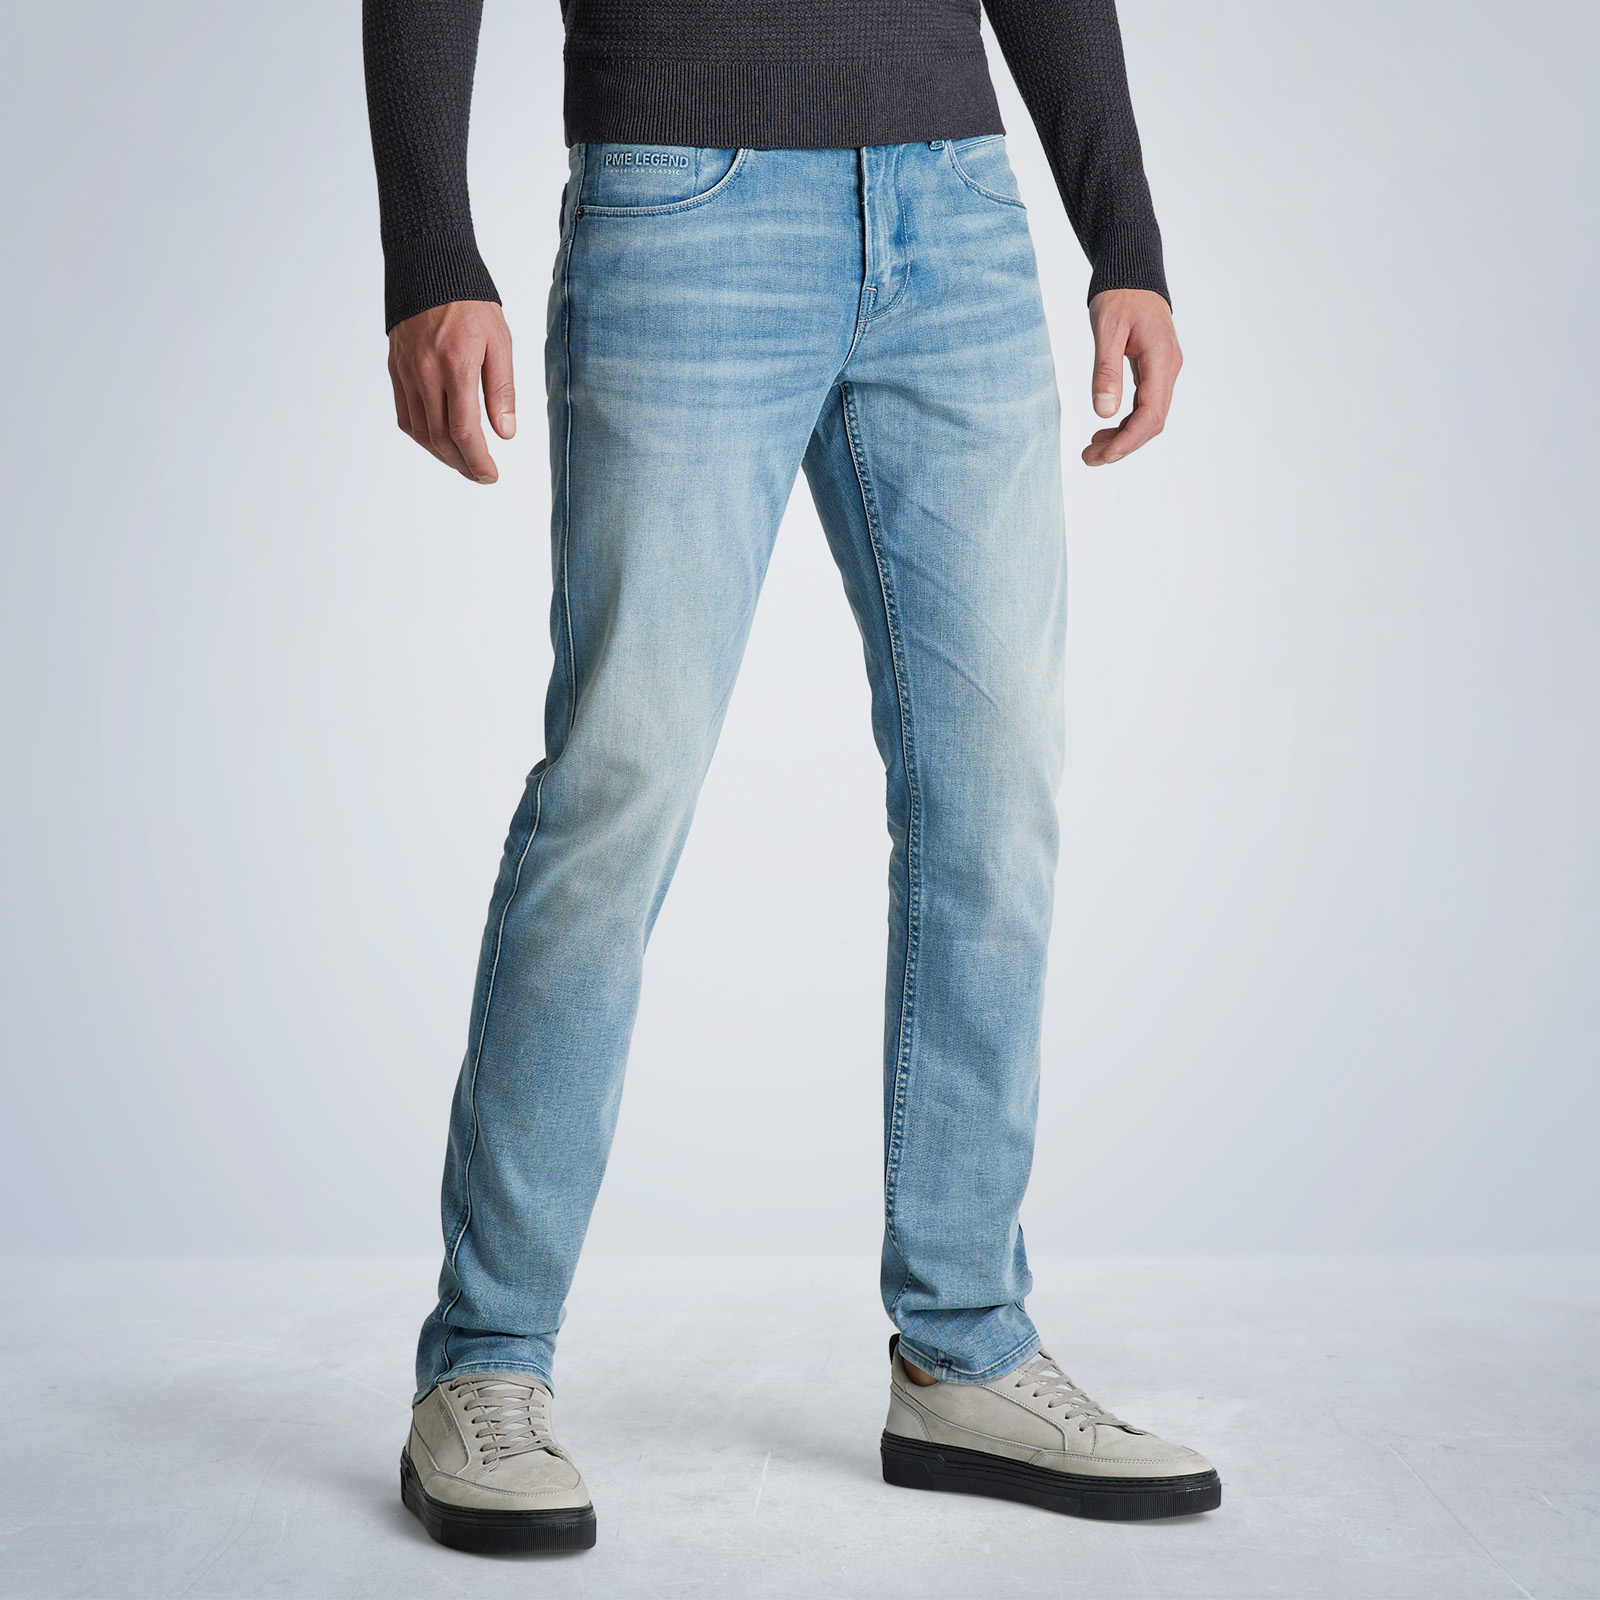 PME LEGEND and Legend Nightflight | returns shipping | Free PME jeans